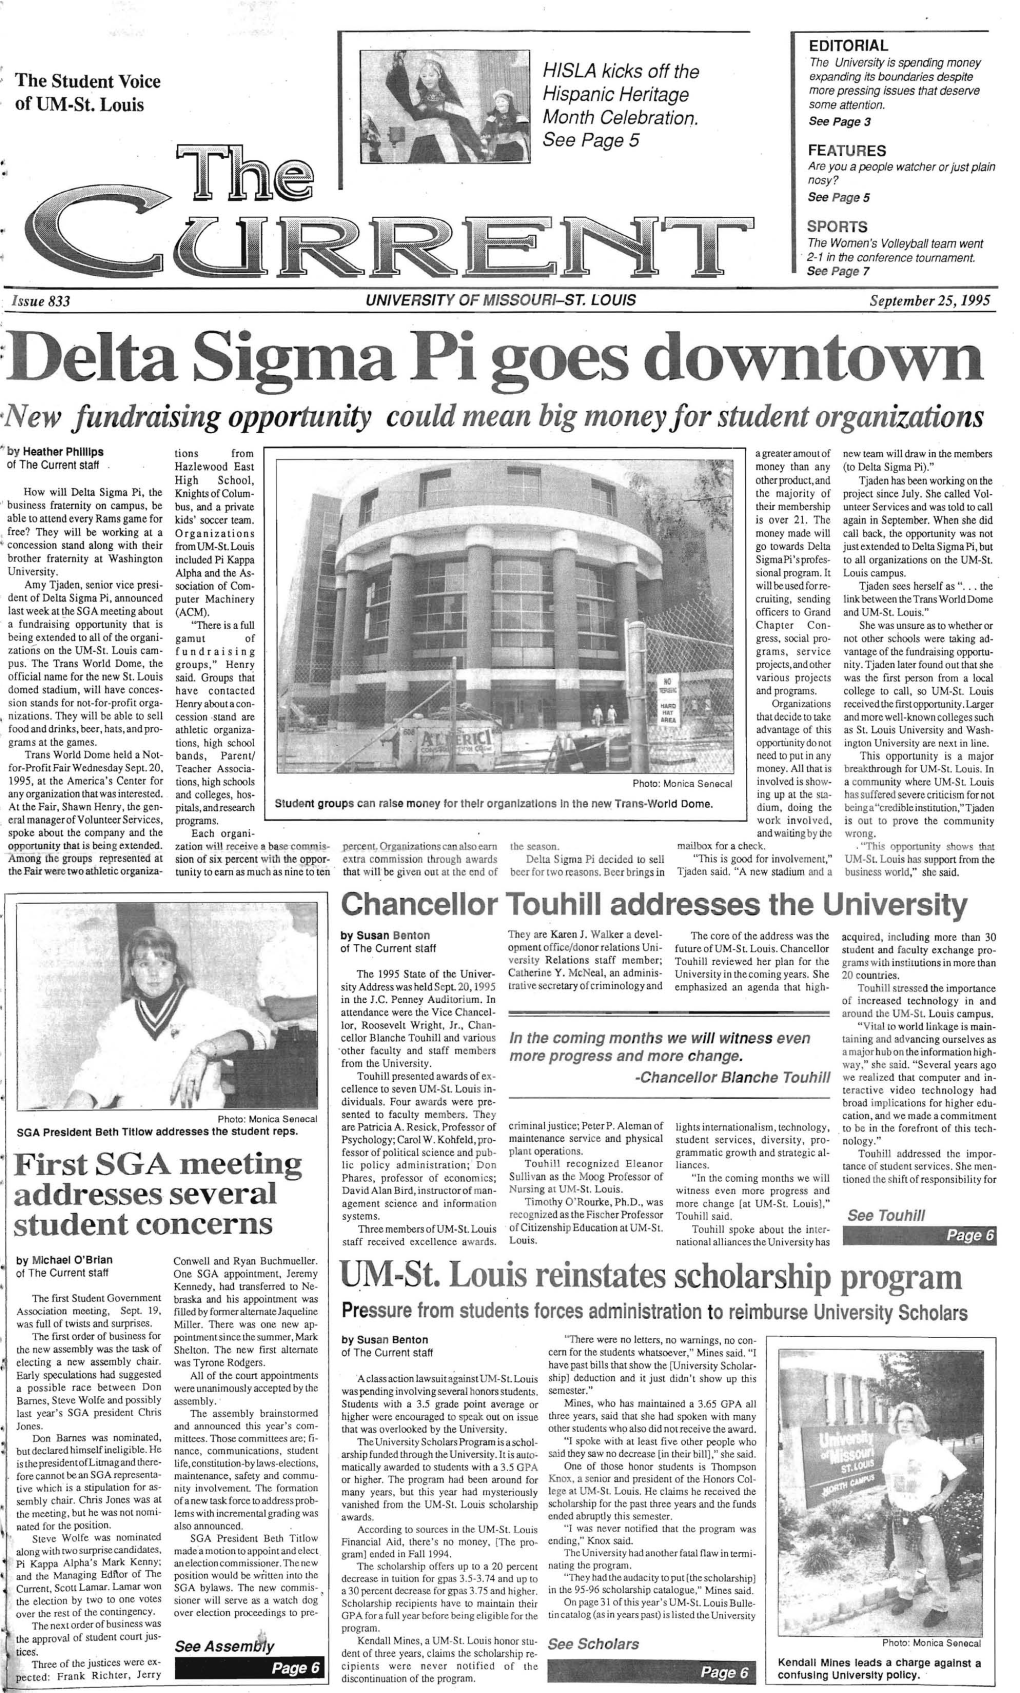 Delta Sigma Pi Goes Downtown New Fundraising Opportunity Could Mean Big Money for Student Organizations